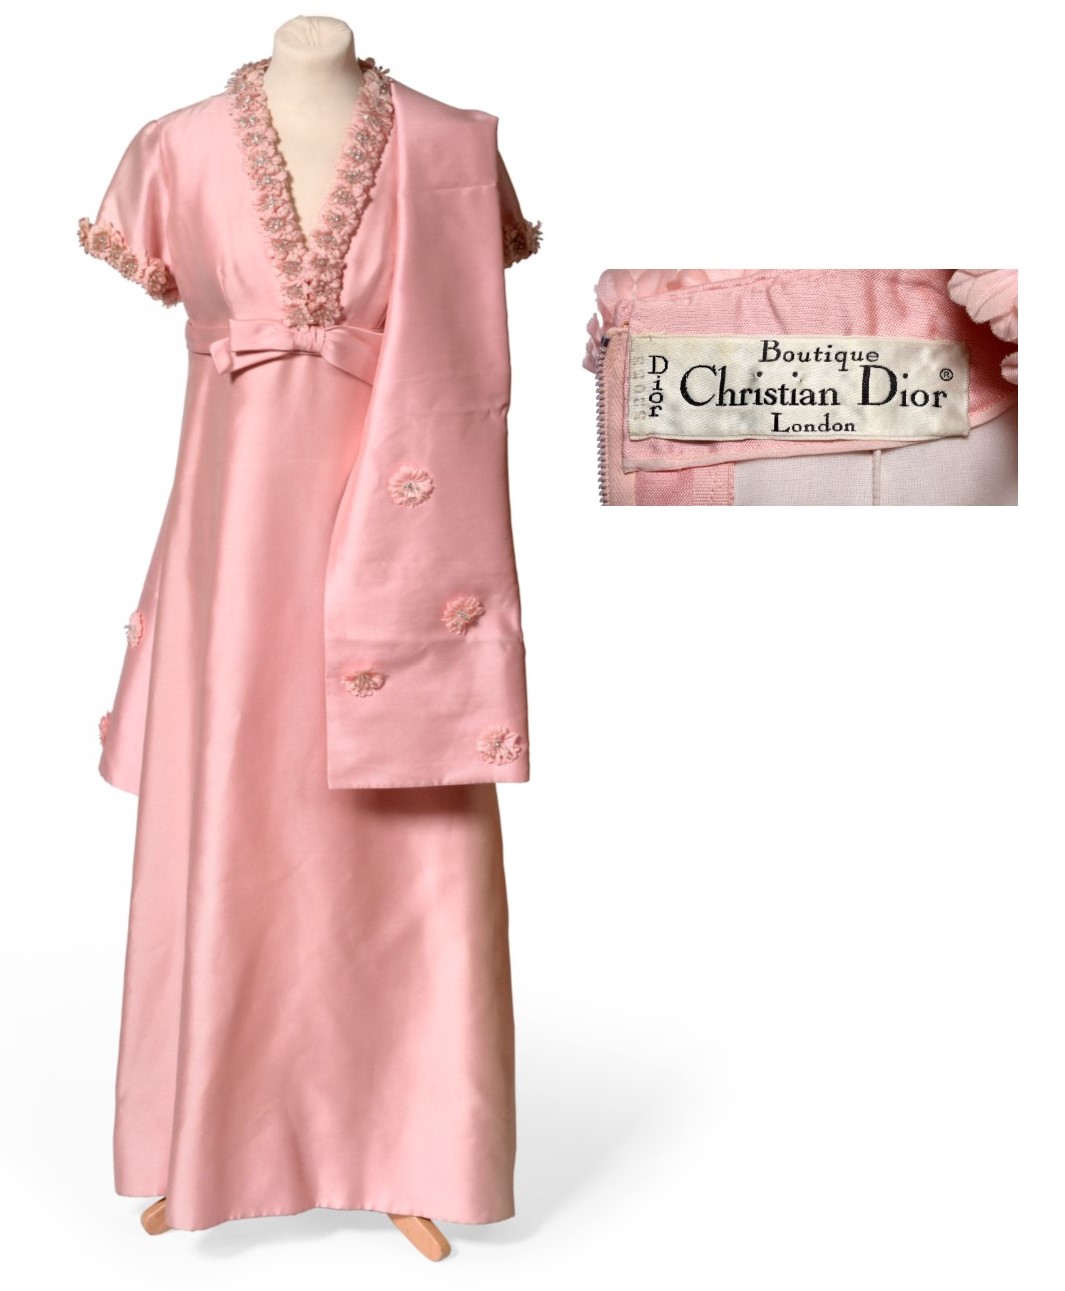 Lot 2168 - Circa 1960's Christian Dior Boutique London Candy Pink Silk Evening Gown, fabric label with...